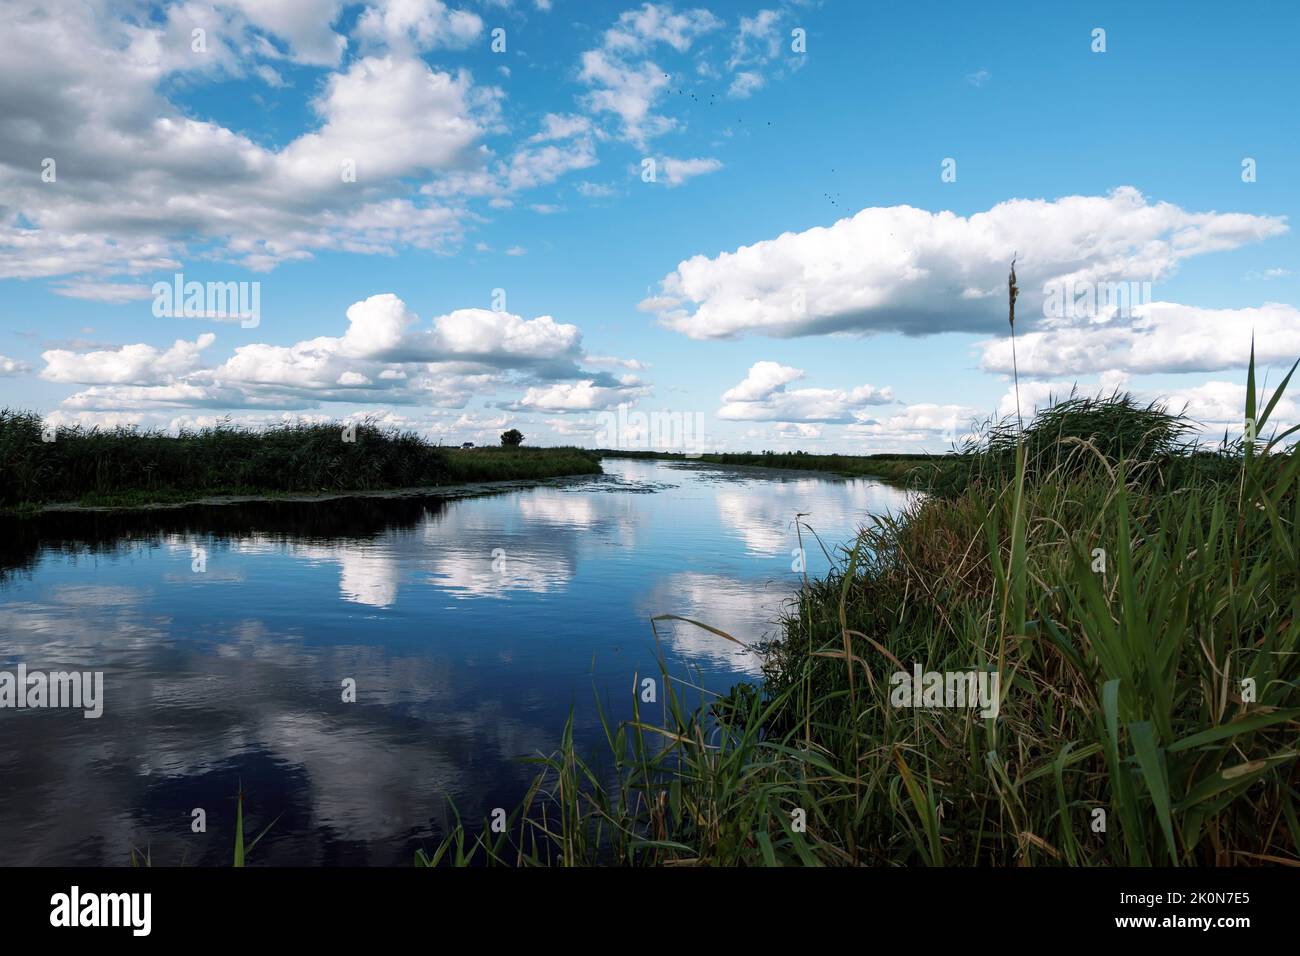 Clouds reflections in the water.  Wild river nature with Moody cloudscape. Rushes by swamp and beautiful dramatic sky. Countryside landscape in polish Stock Photo